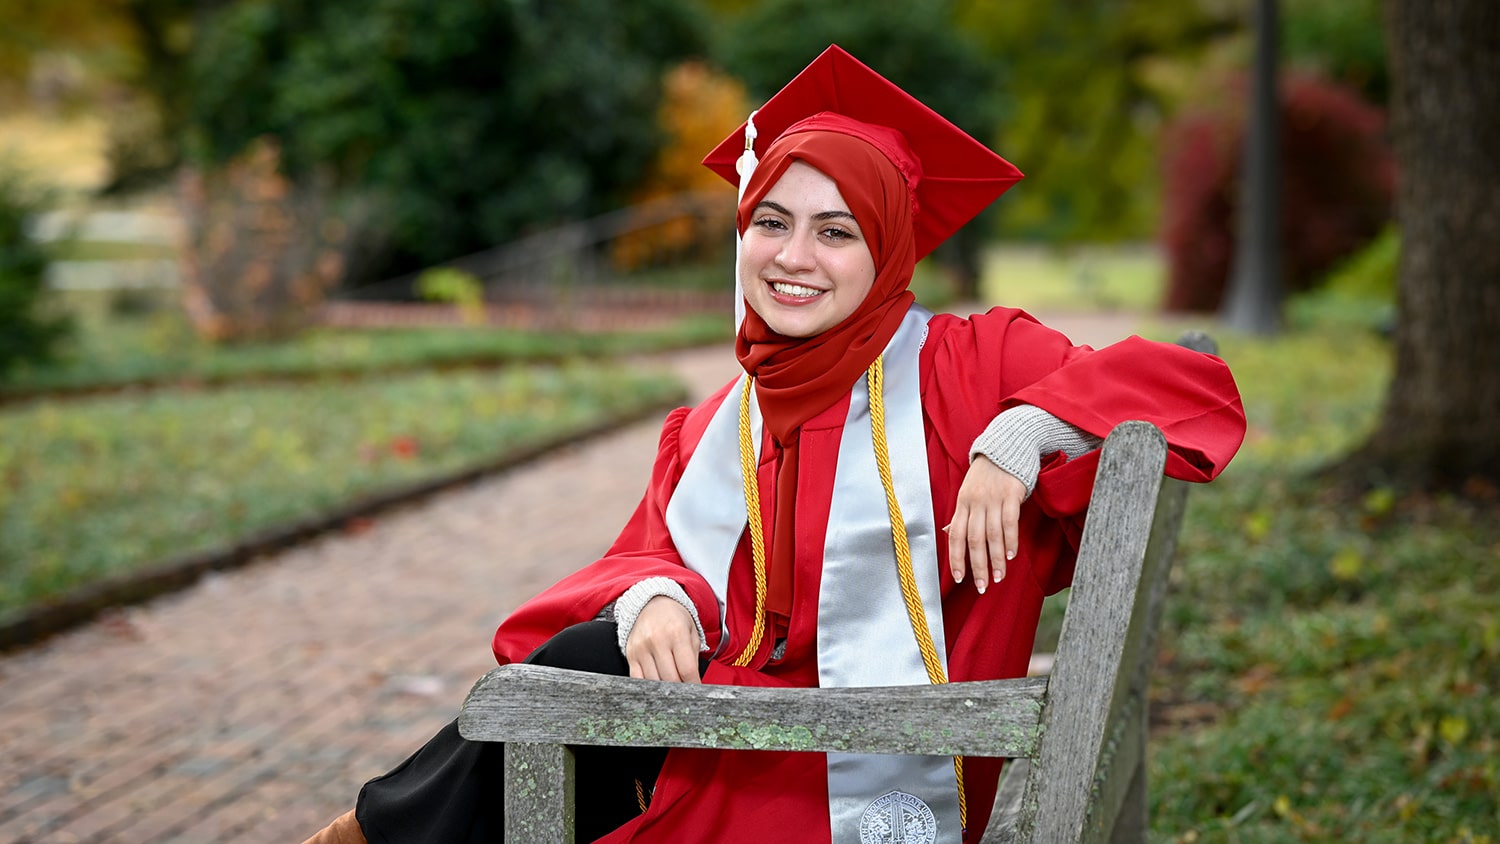 Maab Aldulimy sits on a bench while wearing her red cap and gown.